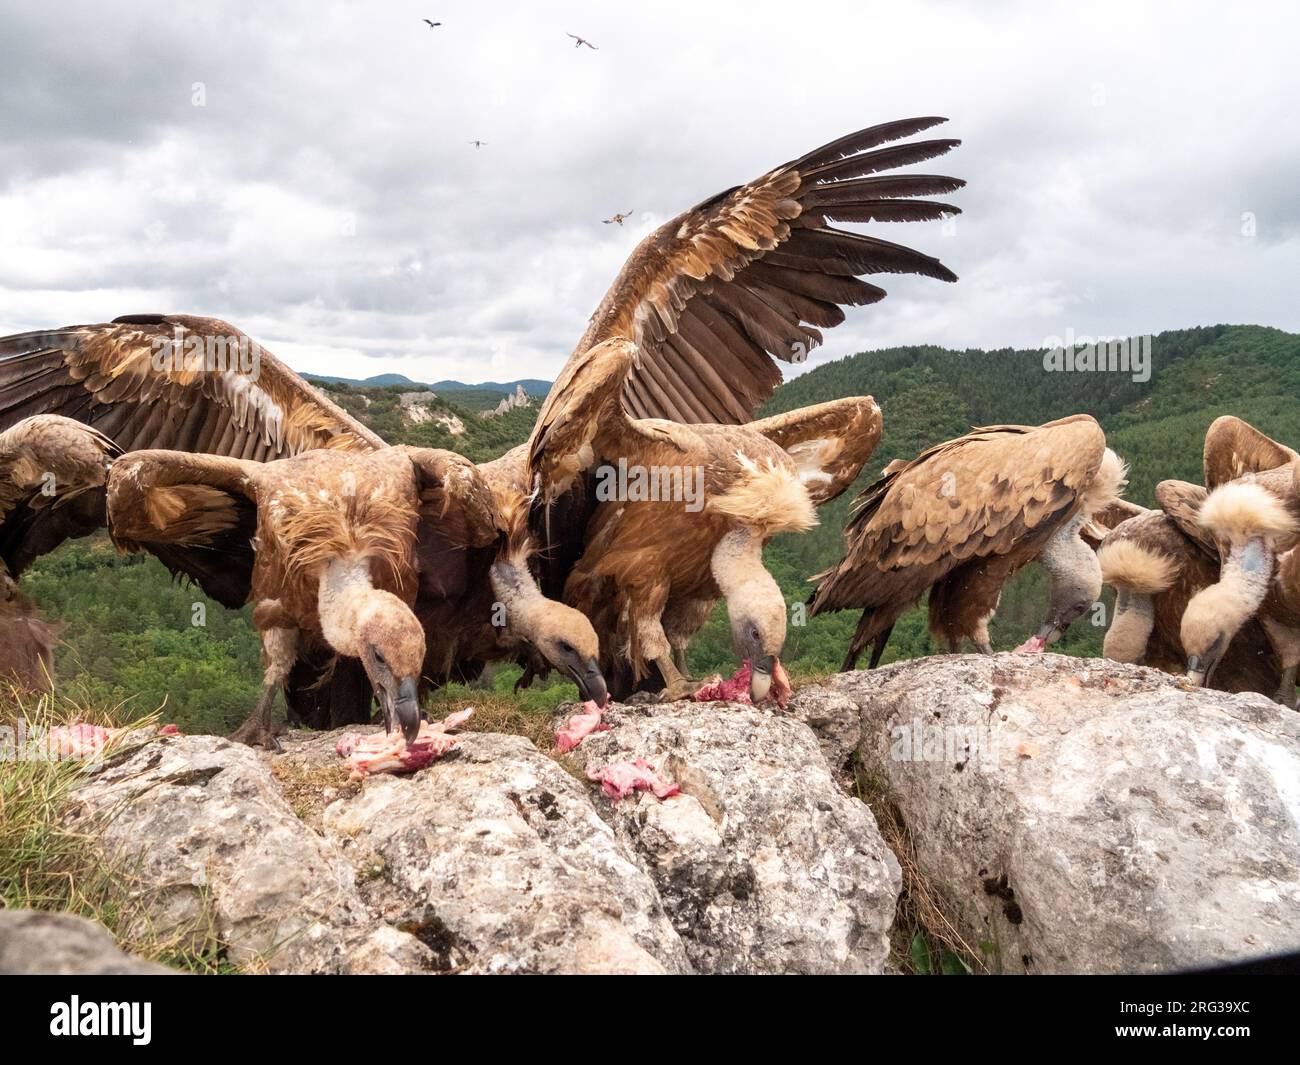 Griffon Vulture, Gyps fulvus. Close-up of some Griffon Vultures eating while other Griffon Vultures are flying in Stock Photo